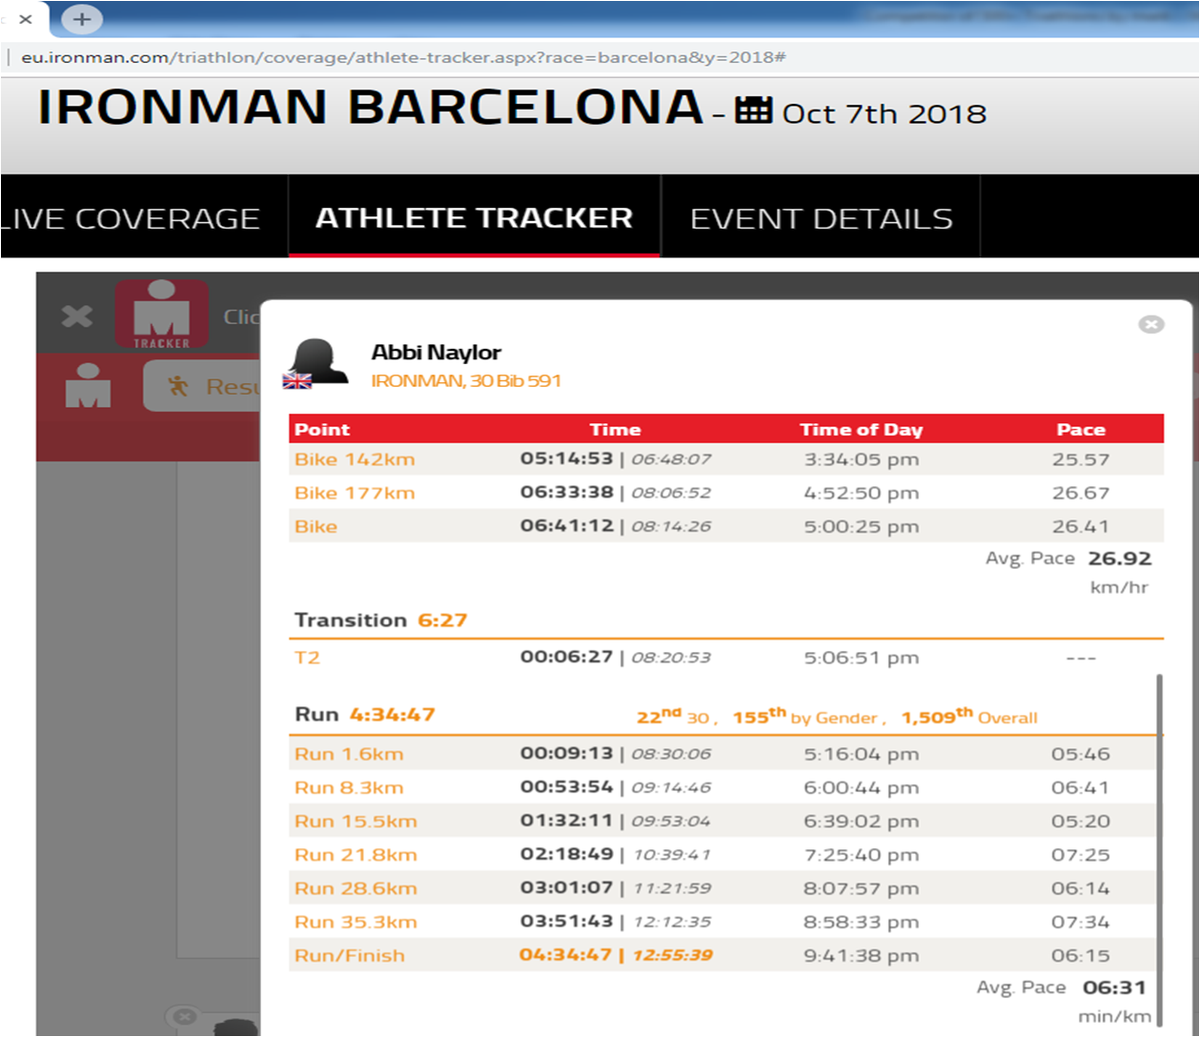 Thanks to @IRONMANLive i could keep track of @AbbiNaylor during #ironman #Barcelona #triathlon #ironmanSpain #ProudCoach #IronMateCoaching #IronmanBarcelona